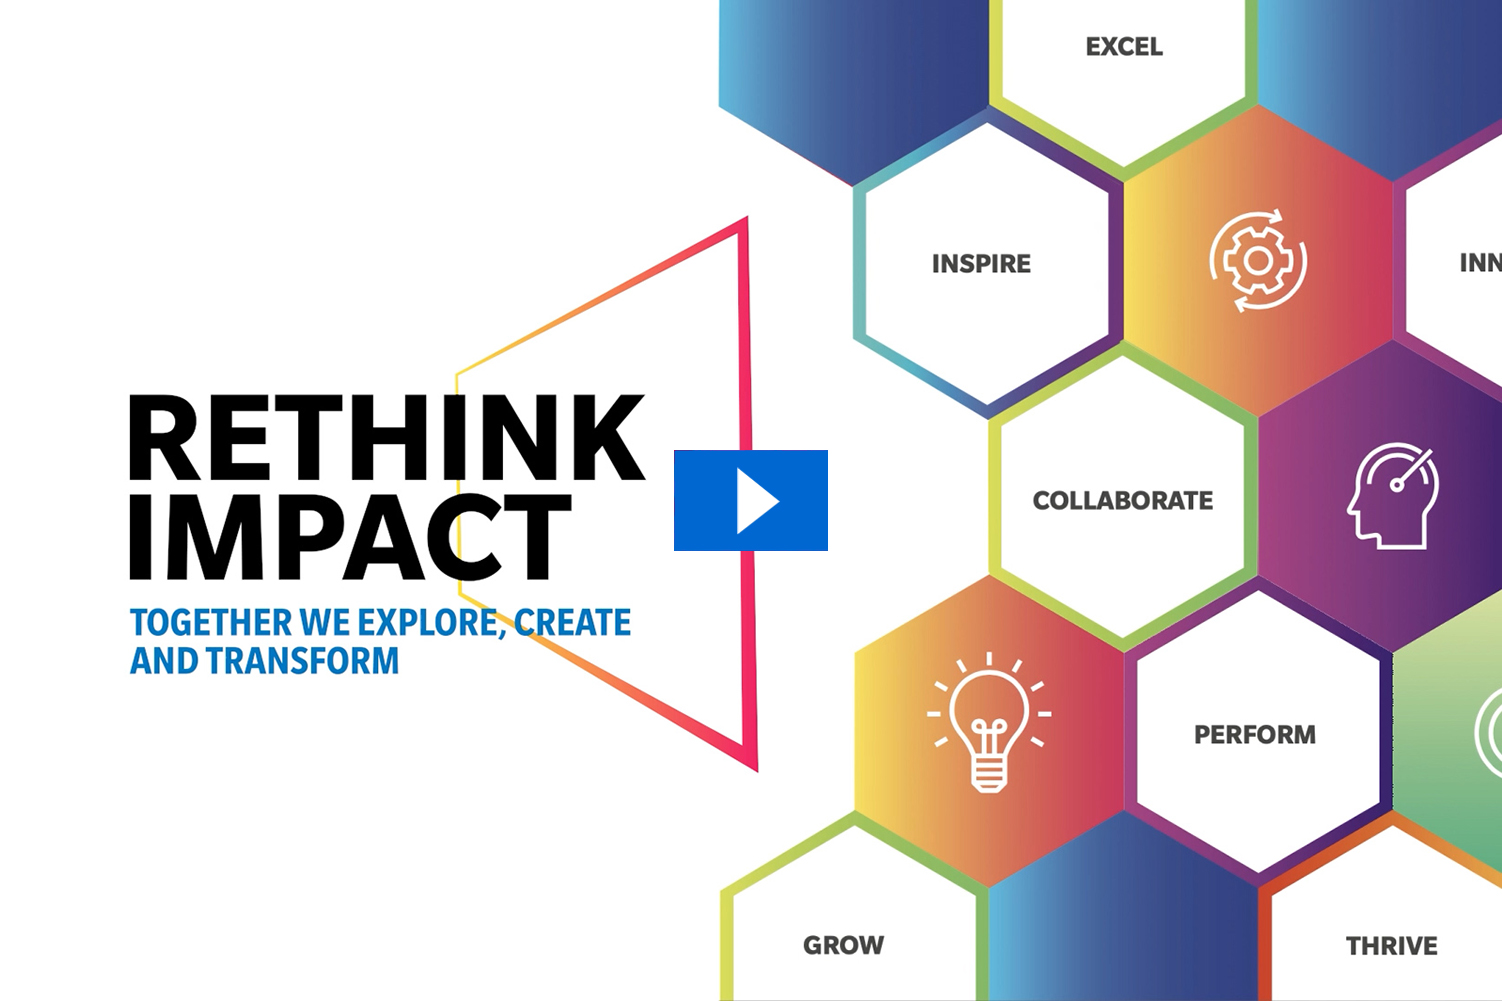 Rethink Impact, together we explore create and transform